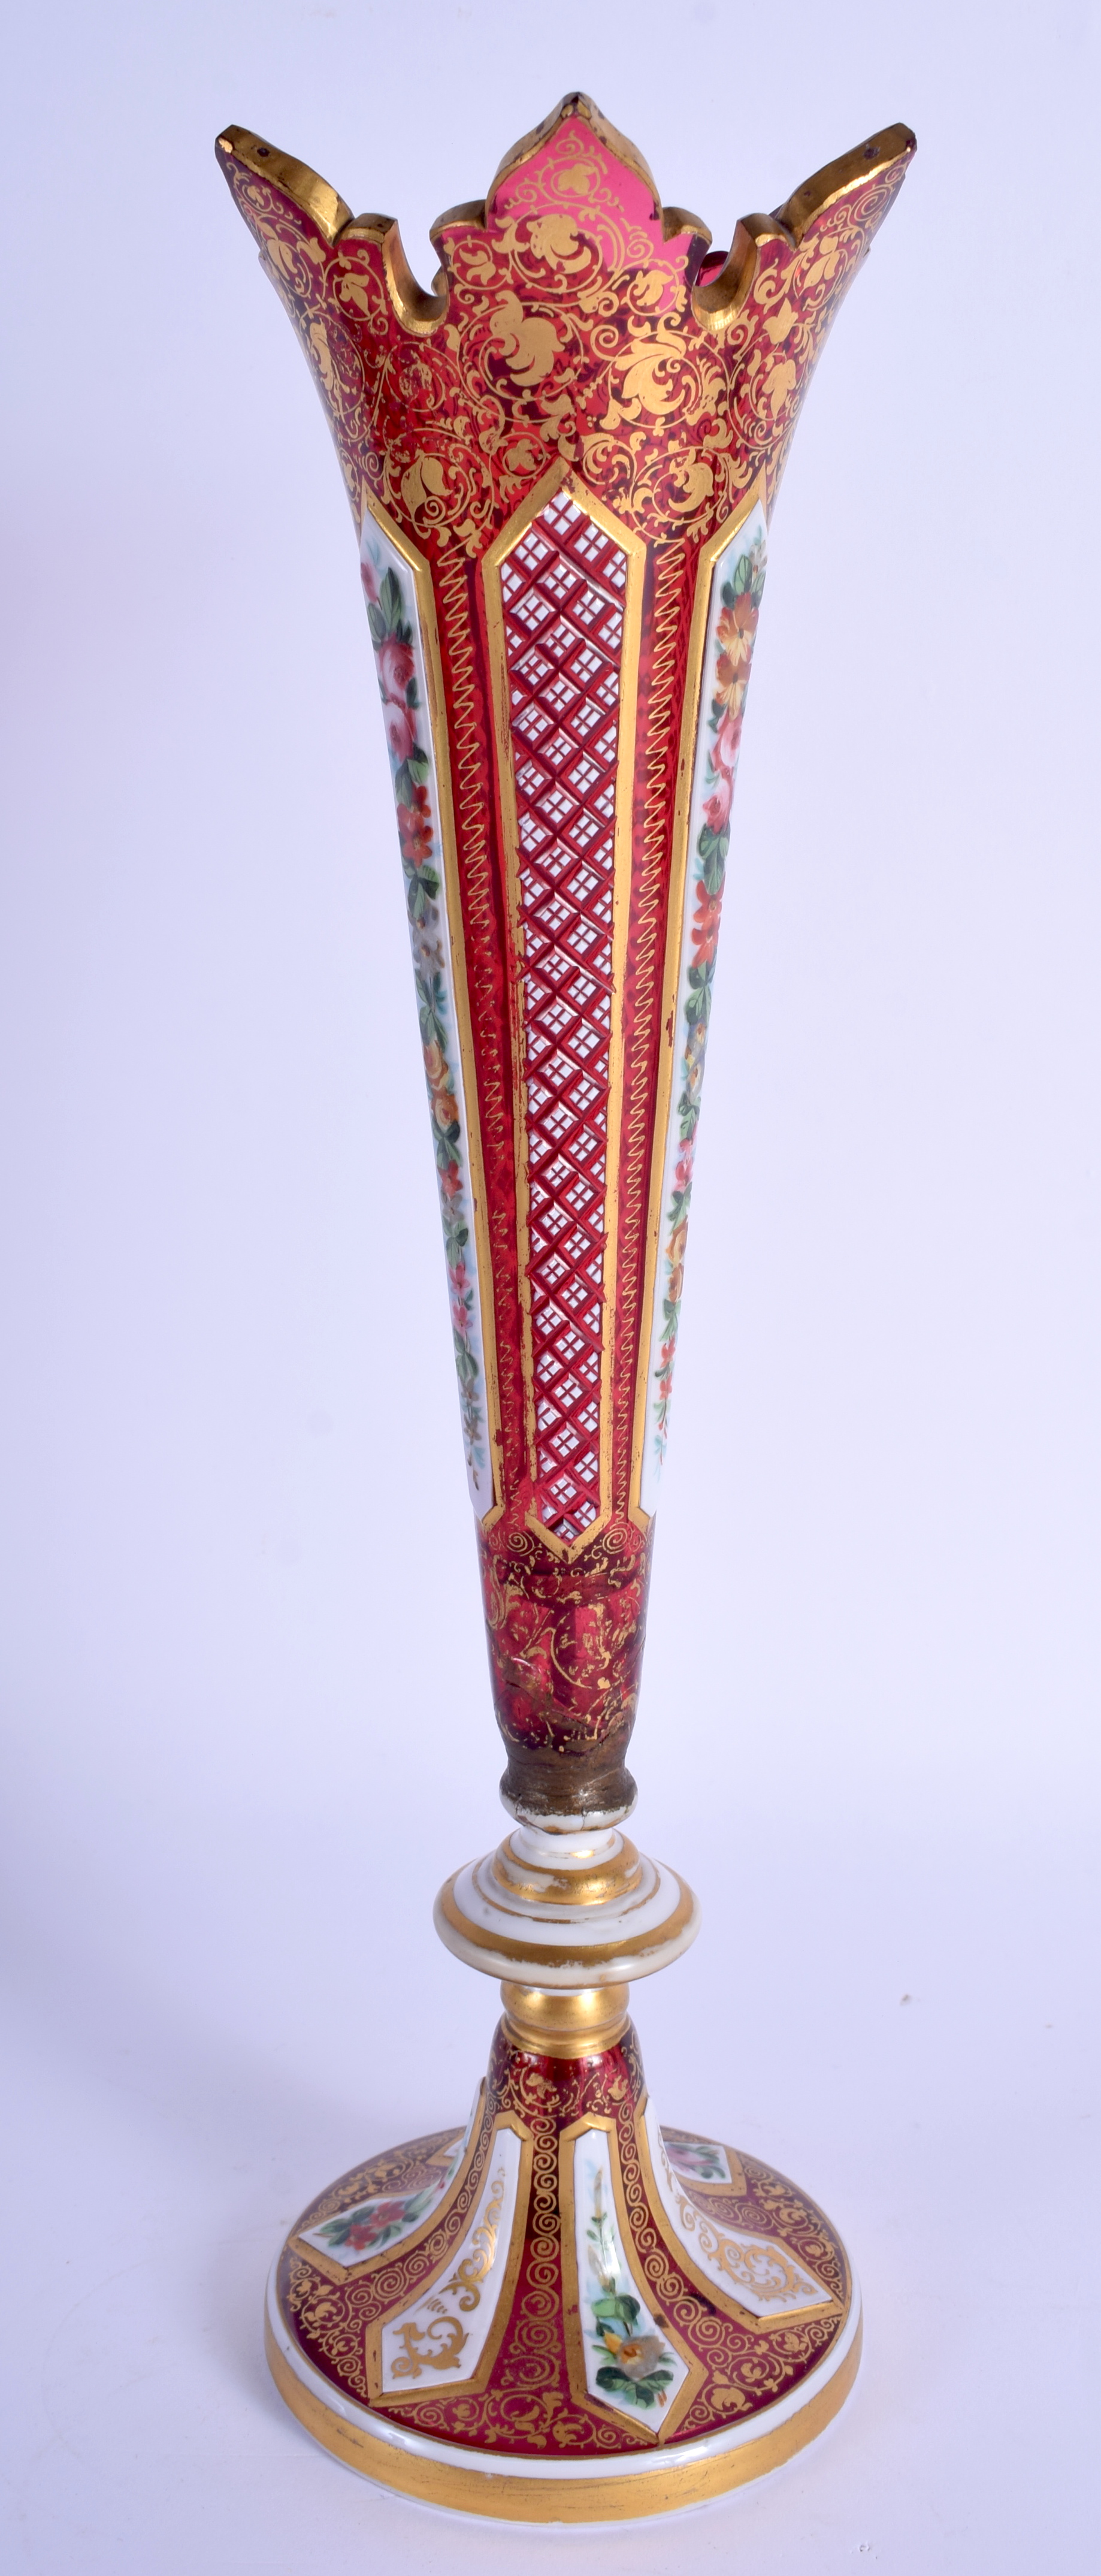 A 19TH CENTURY BOHEMIAN ENAMELLED GLASS VASE painted and jewelled with foliage. 31 cm high. - Image 2 of 3